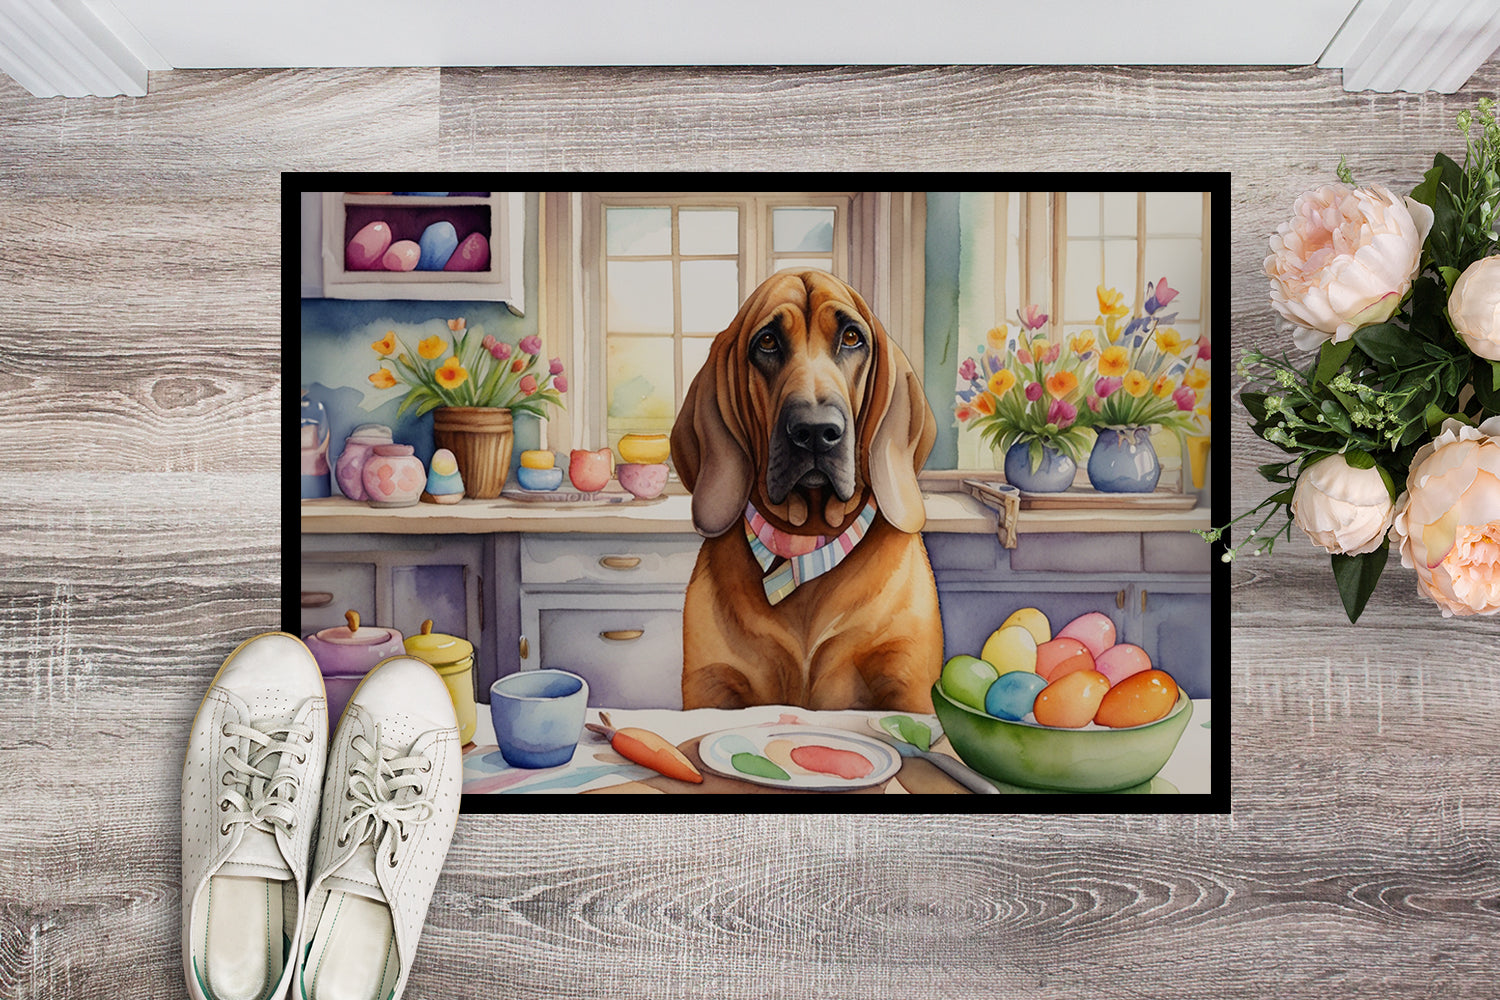 Buy this Decorating Easter Bloodhound Doormat